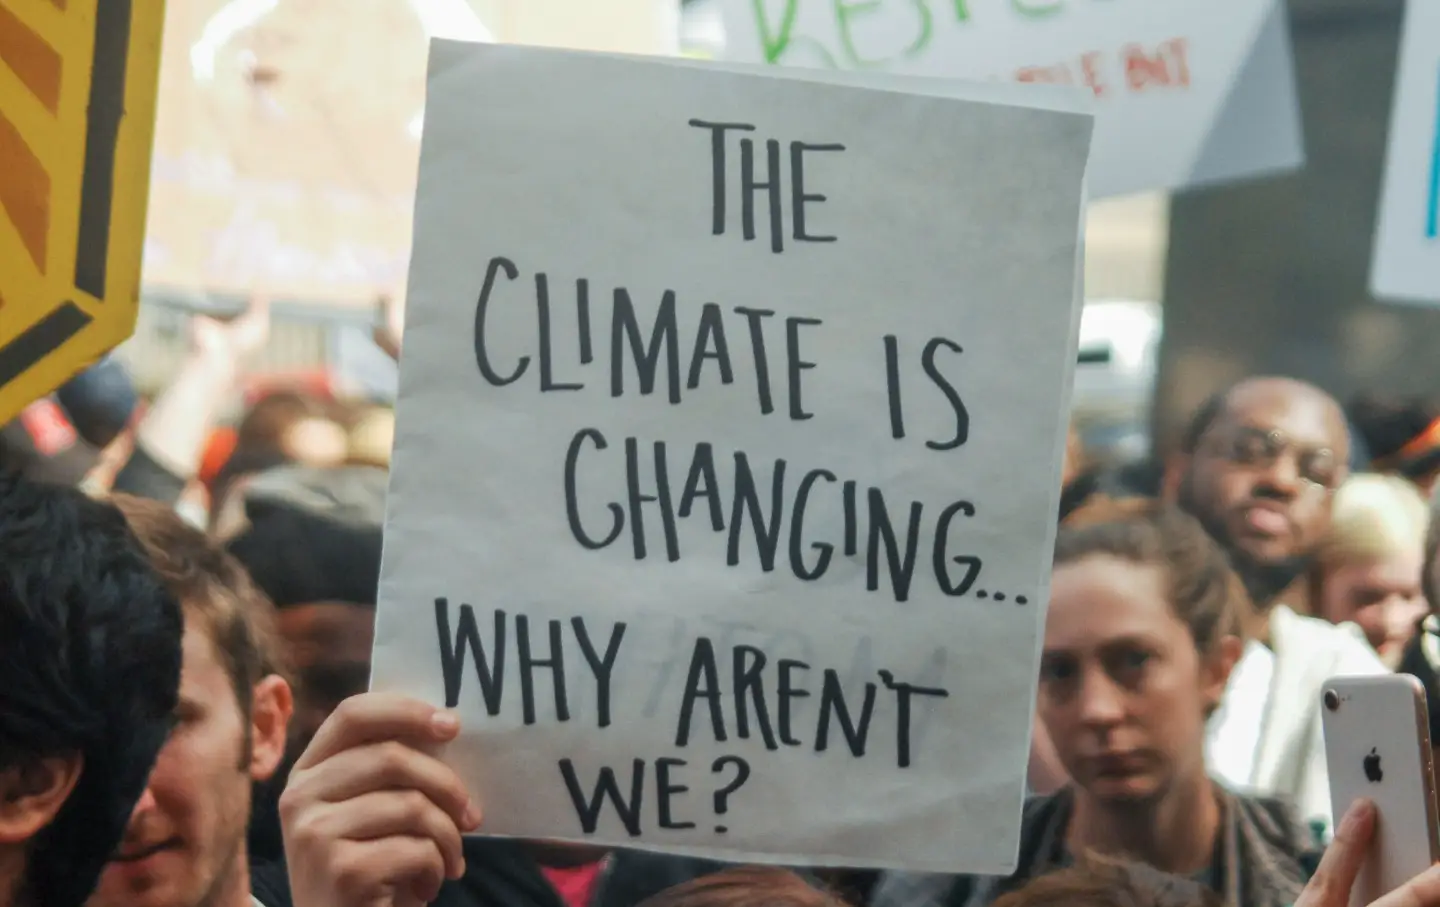 We Can’t Wait for Our Institutions to Take Action on Climate Change